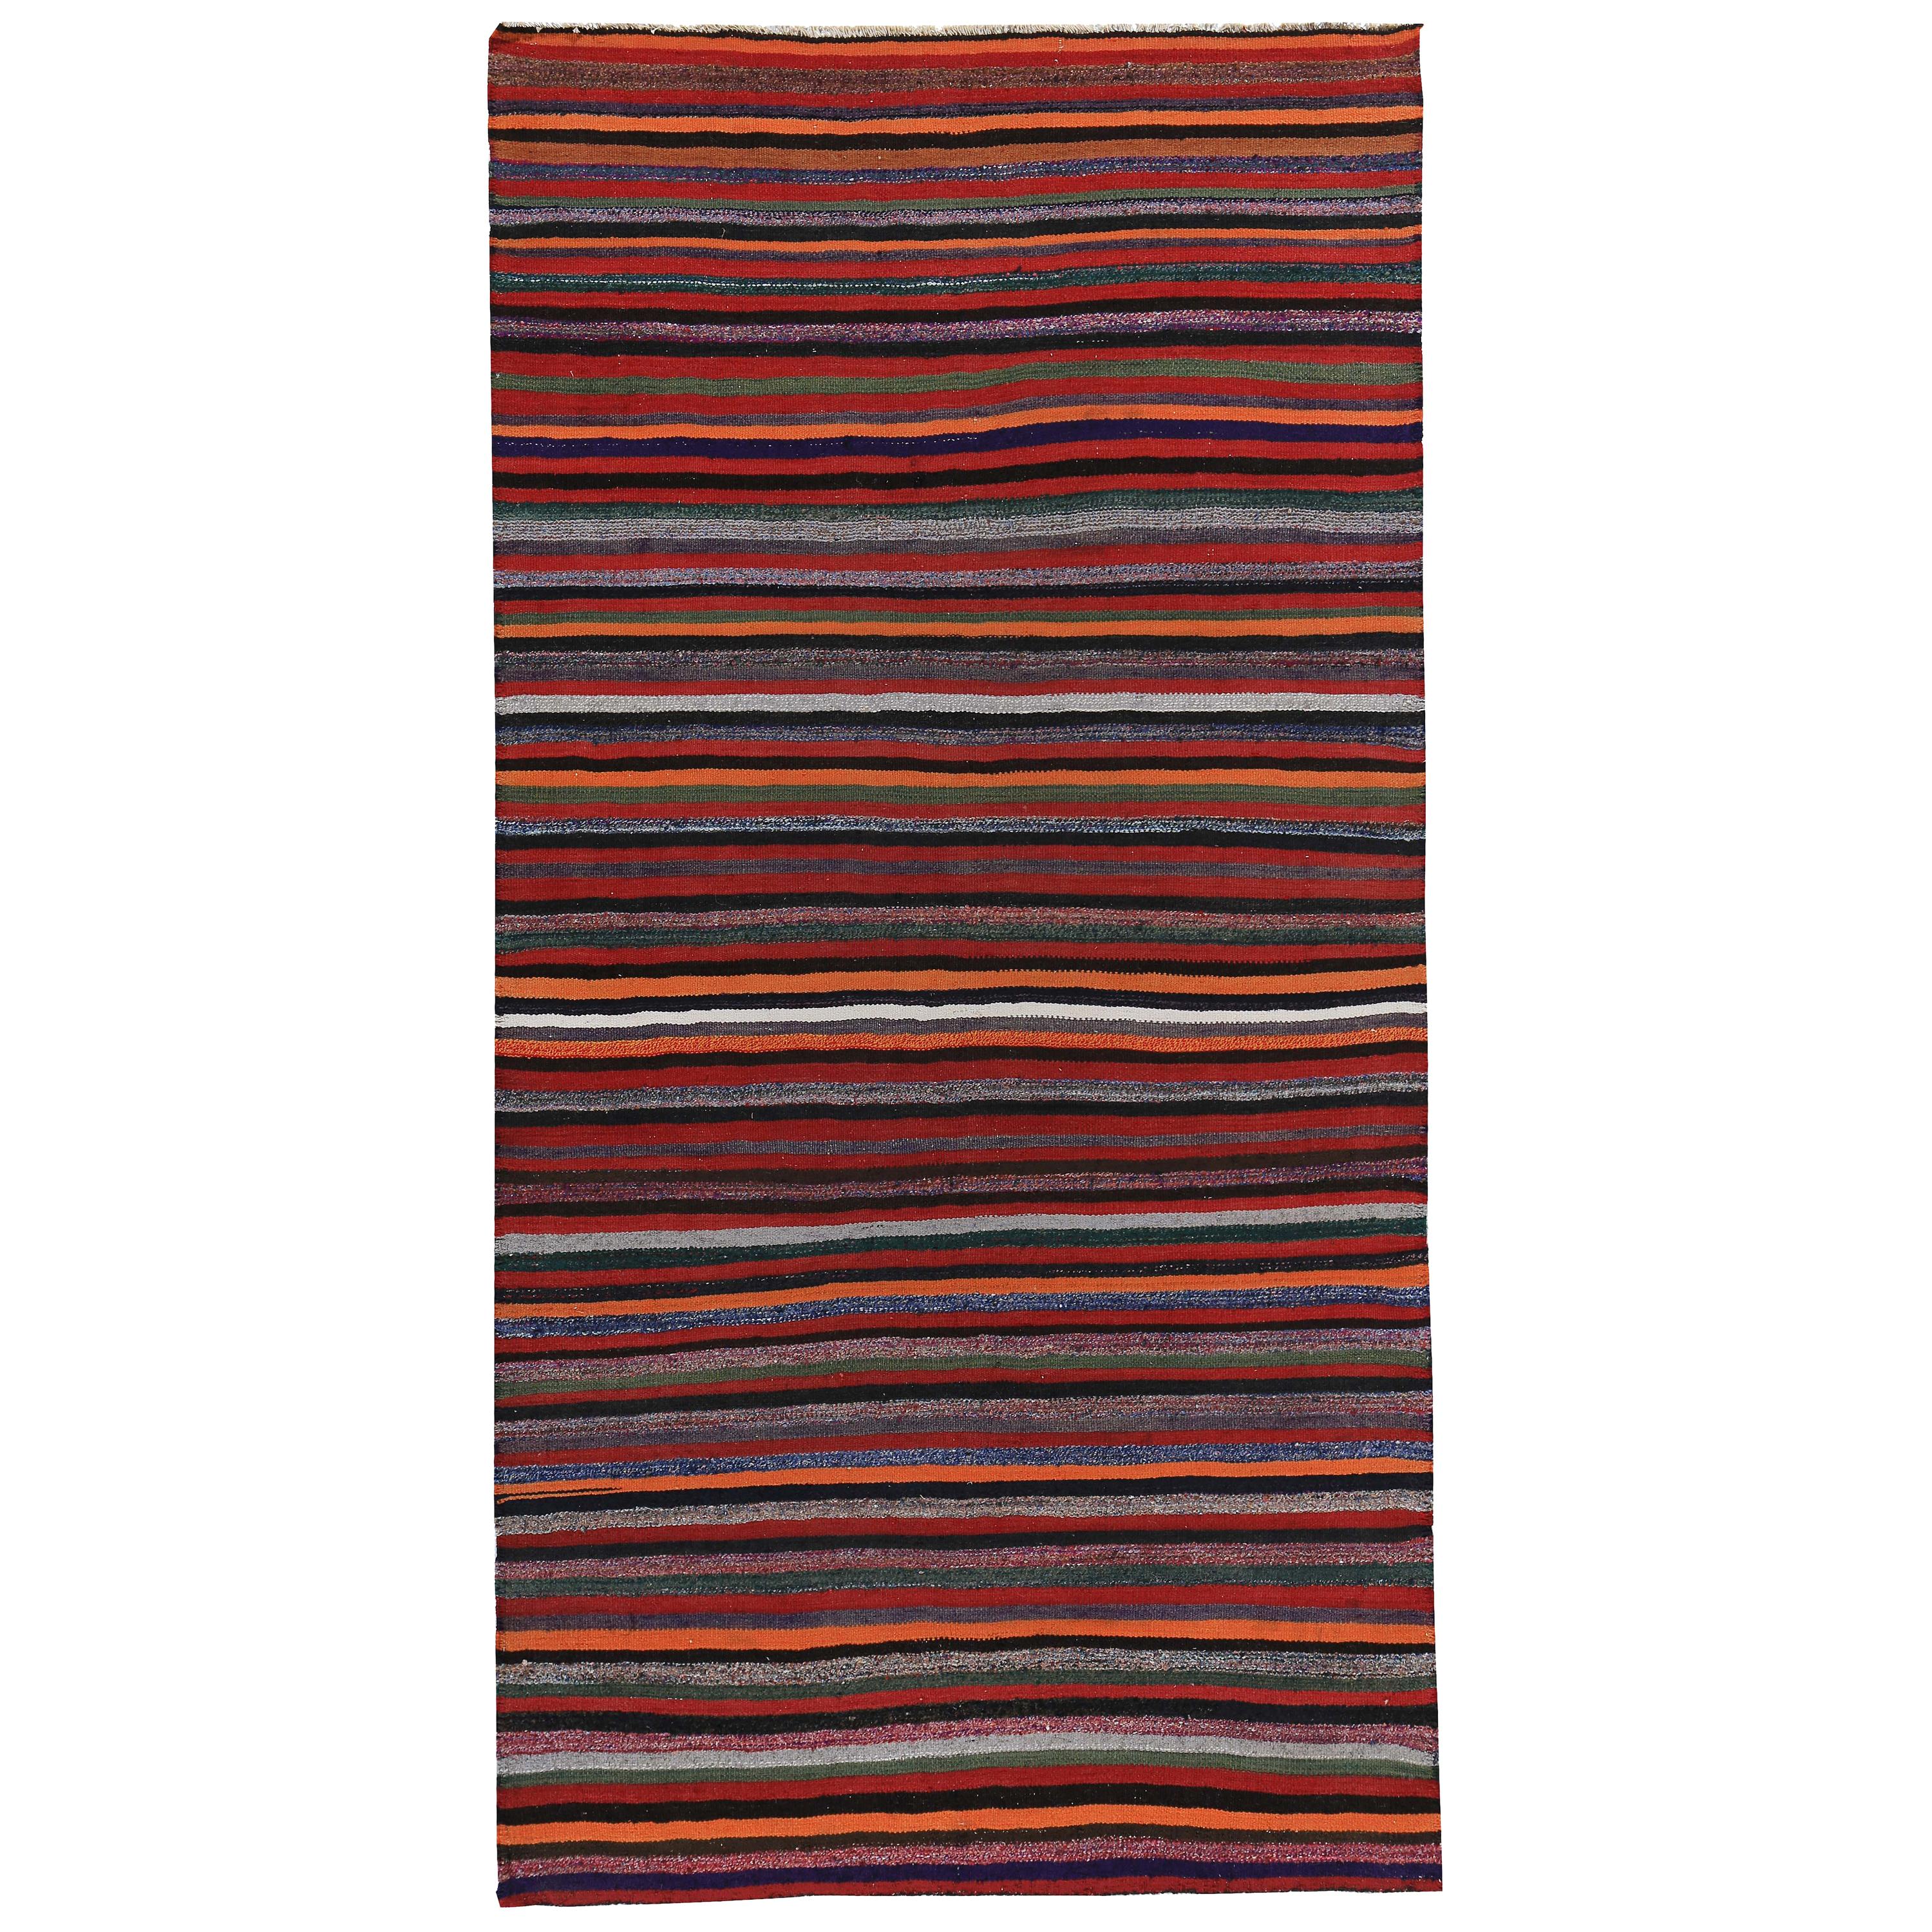 Turkish Kilim Rug with Multicolored Tribal Stripes For Sale